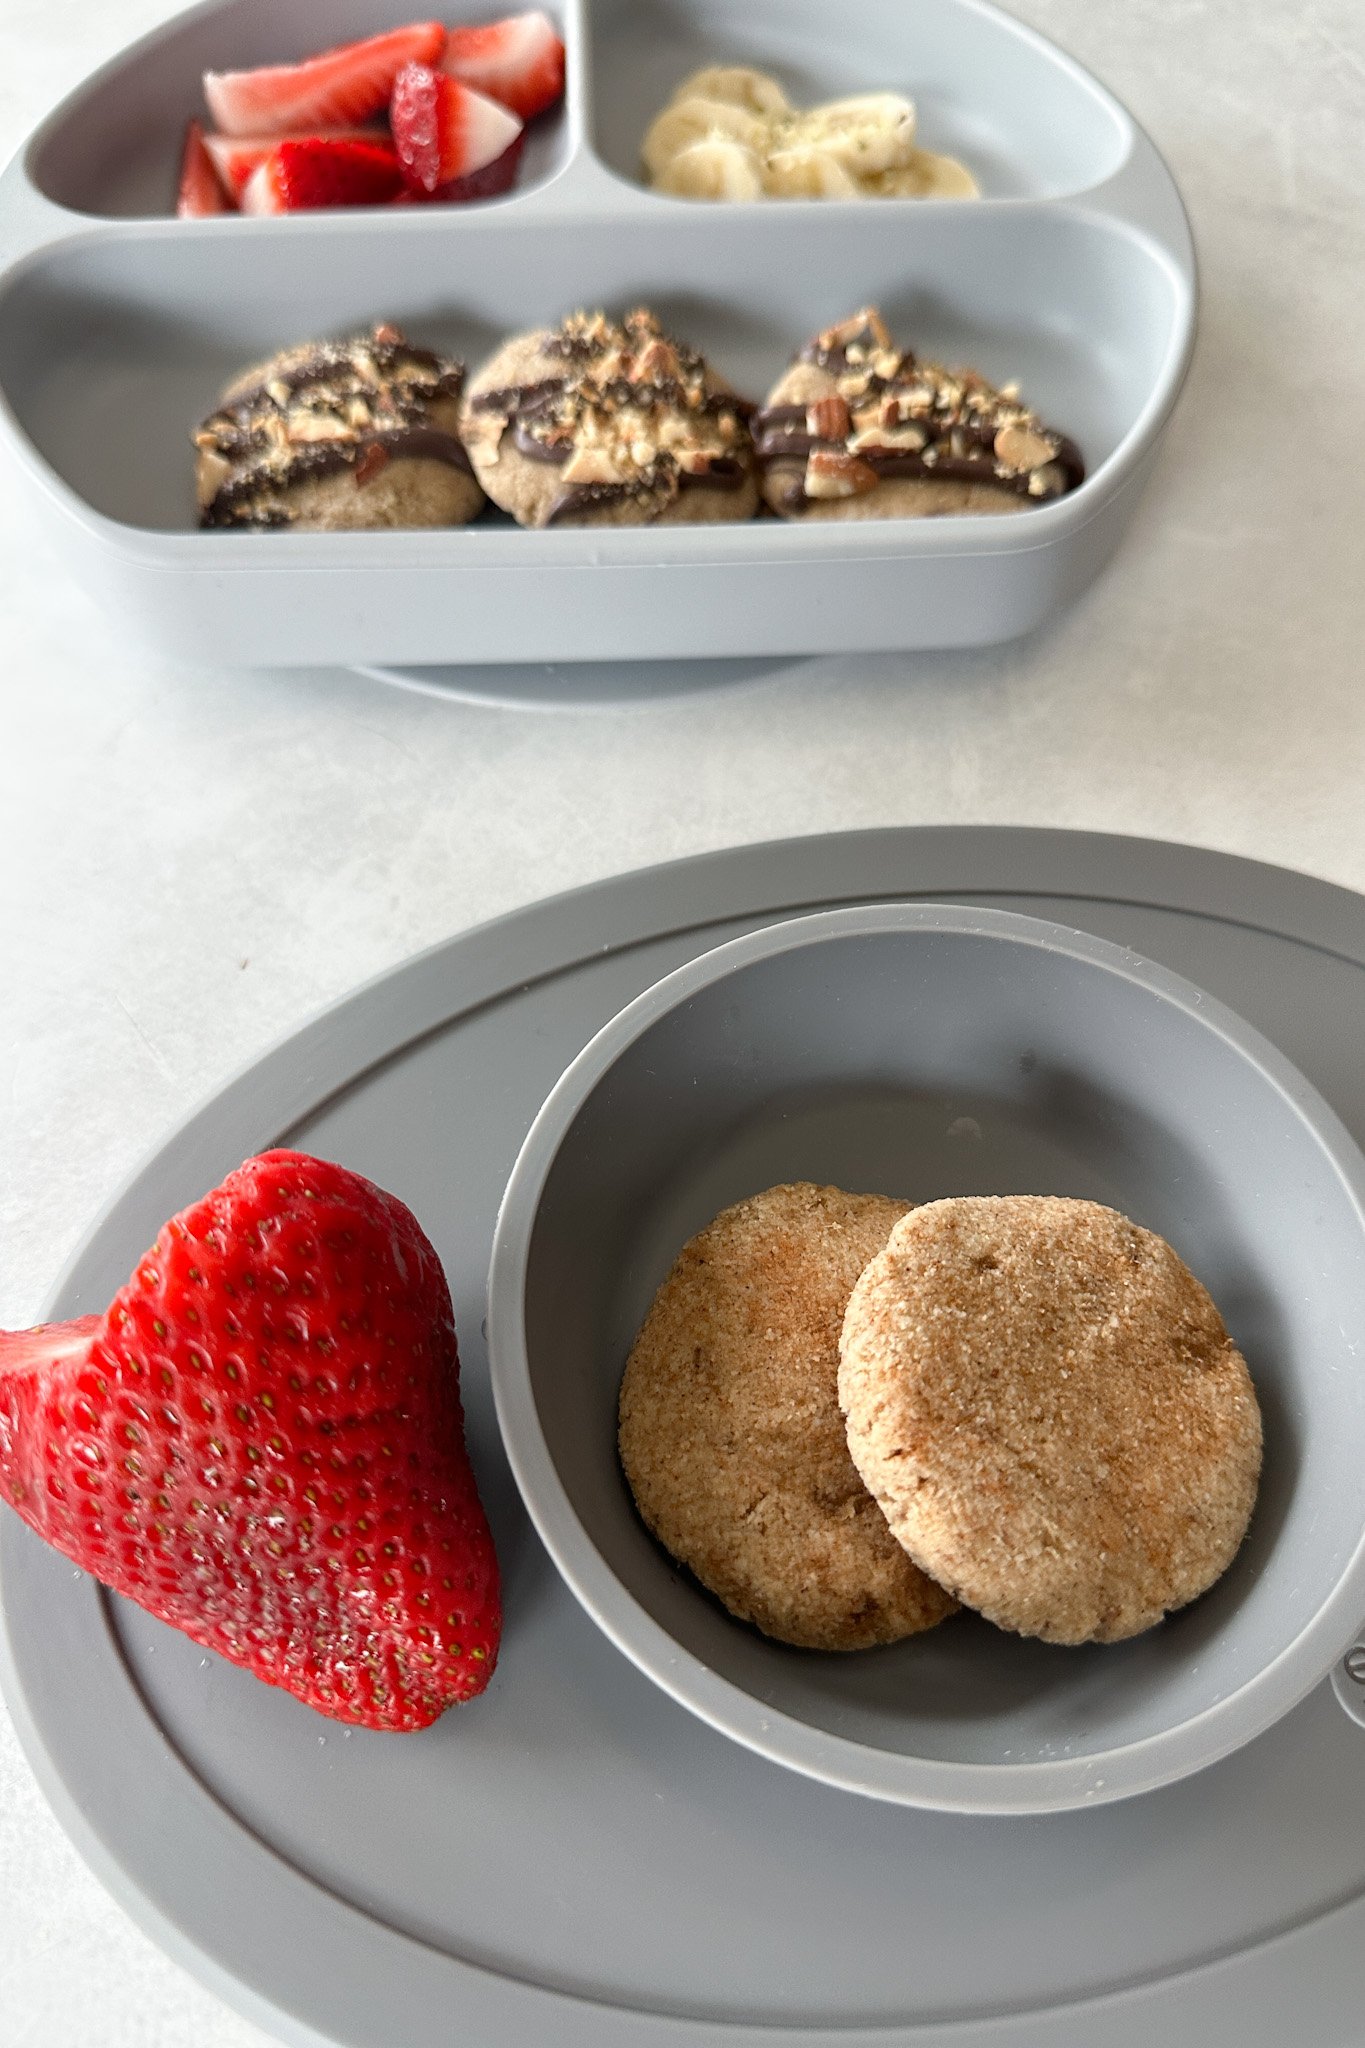 Banana bread cookies served with strawberries.